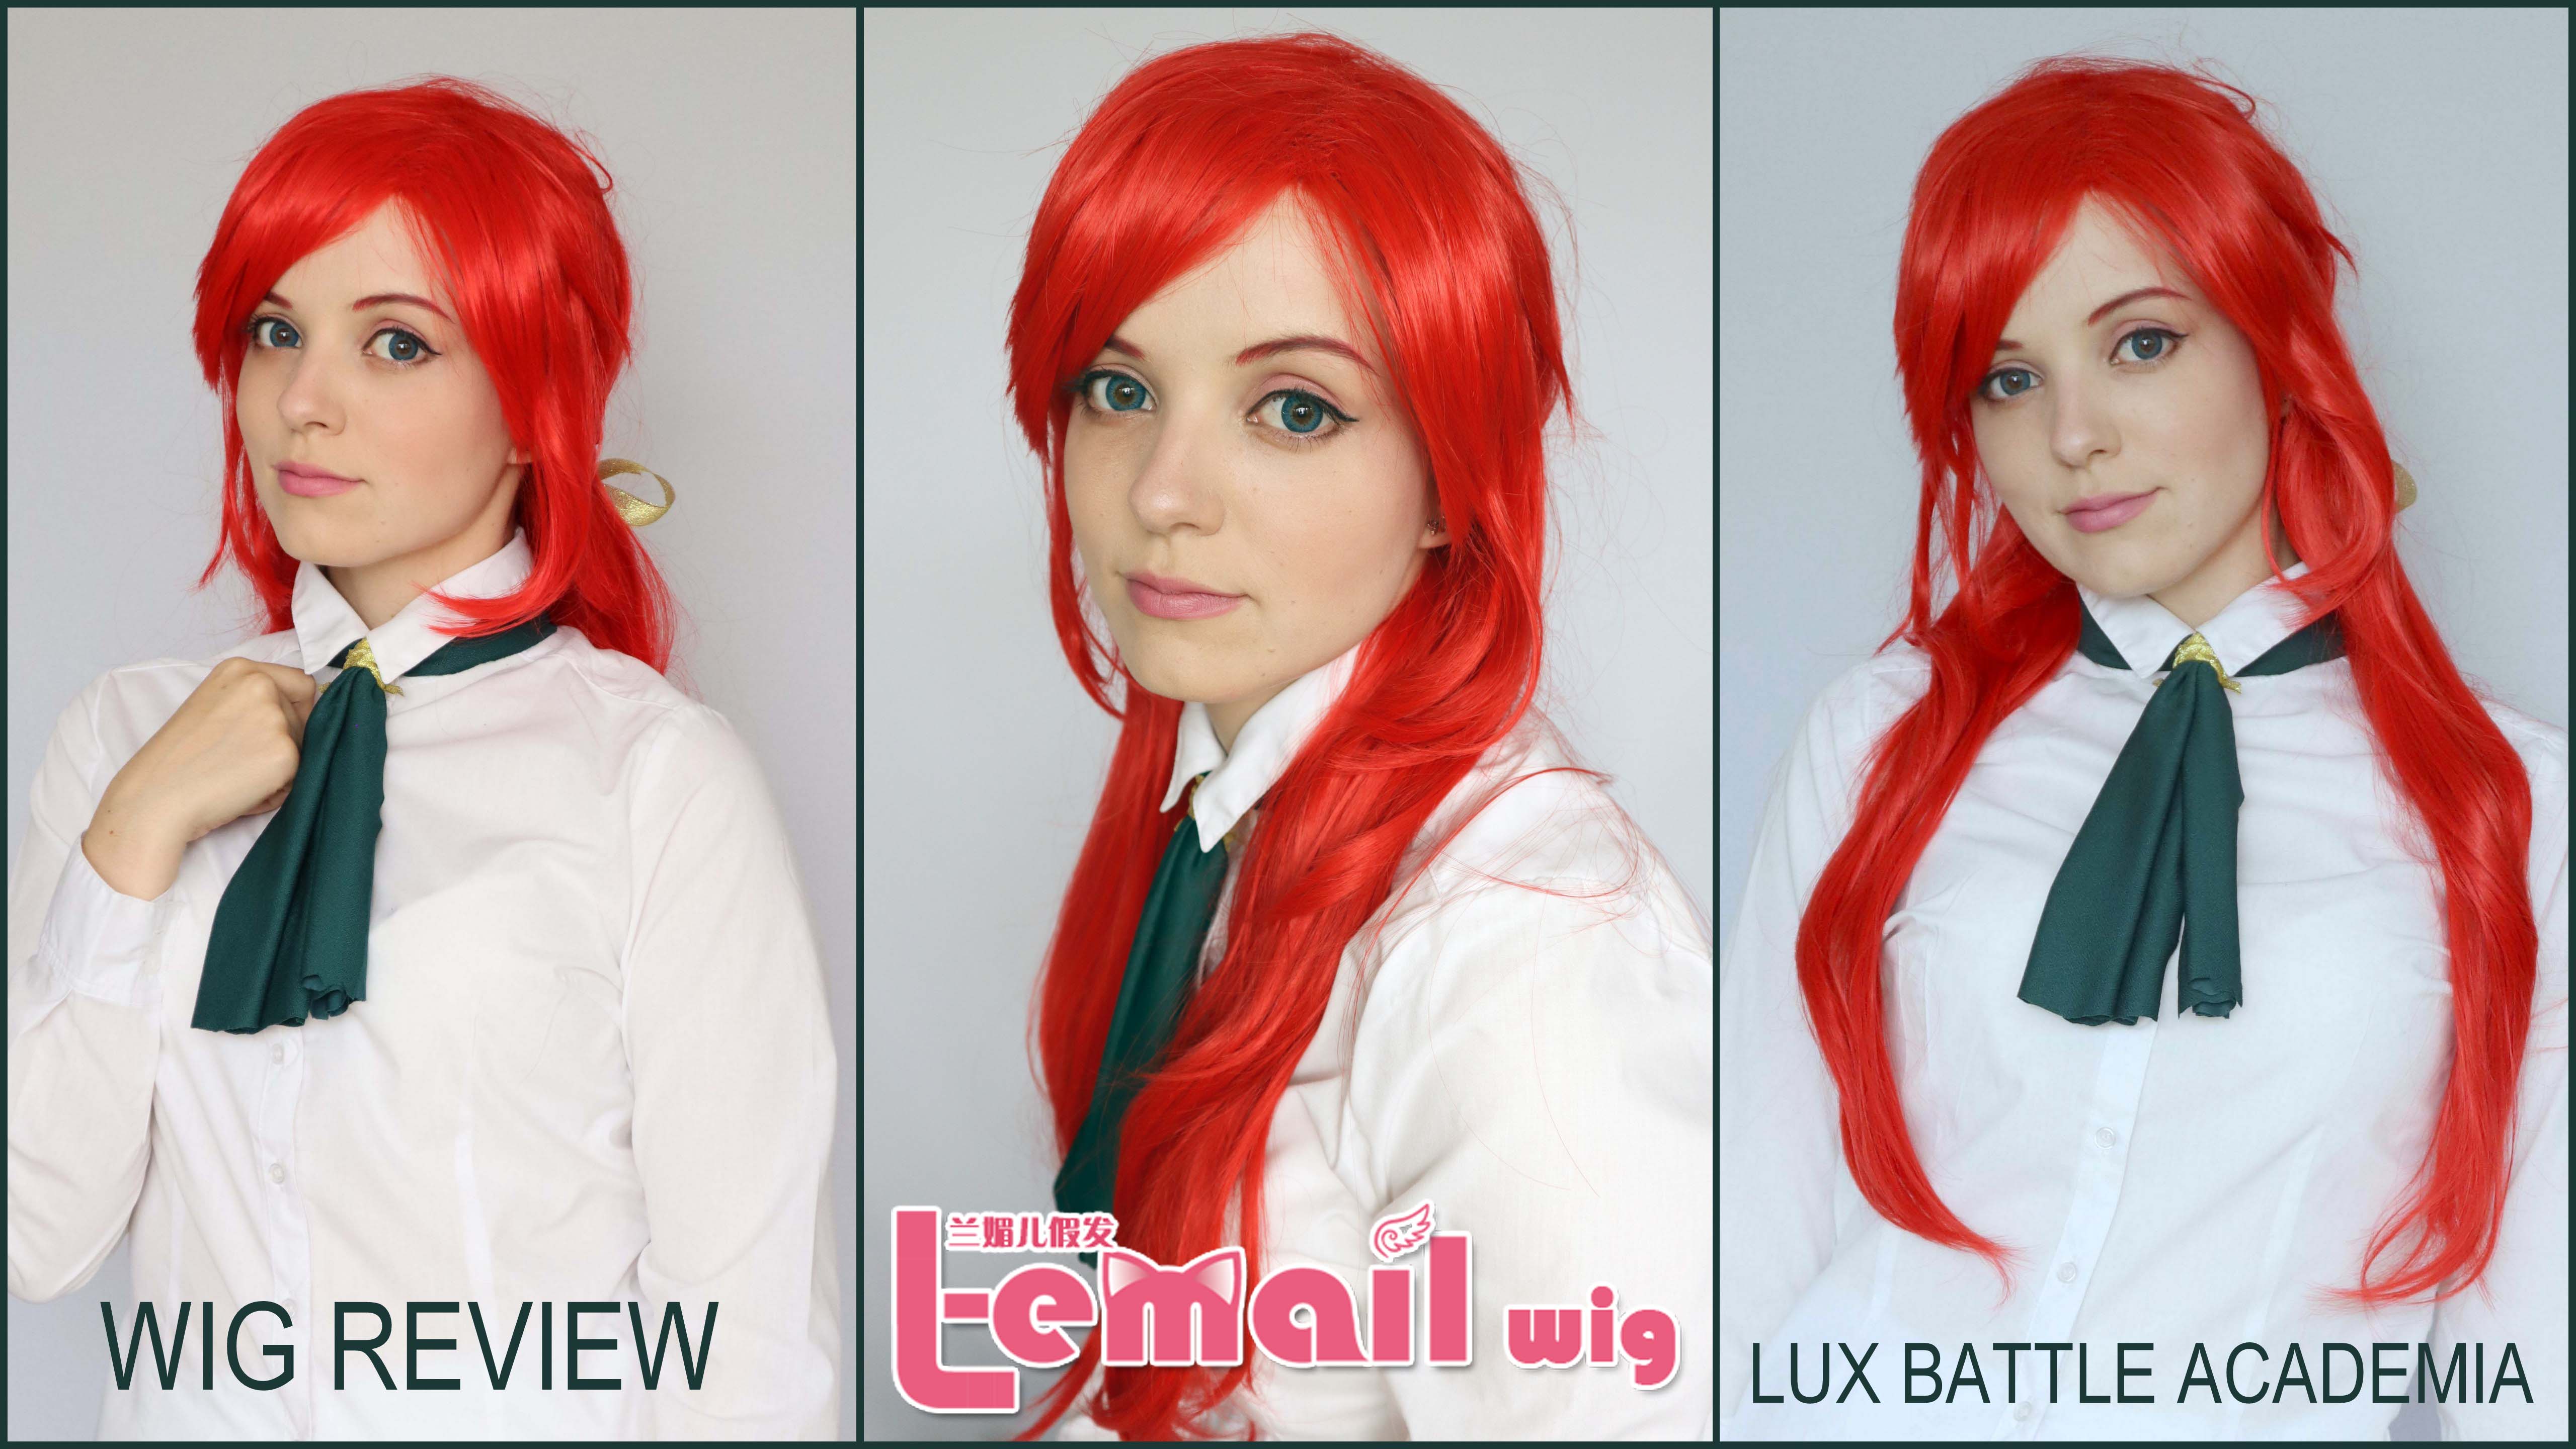 Cosplay Wig review: Battle Academia Lux from L-email Wigs.